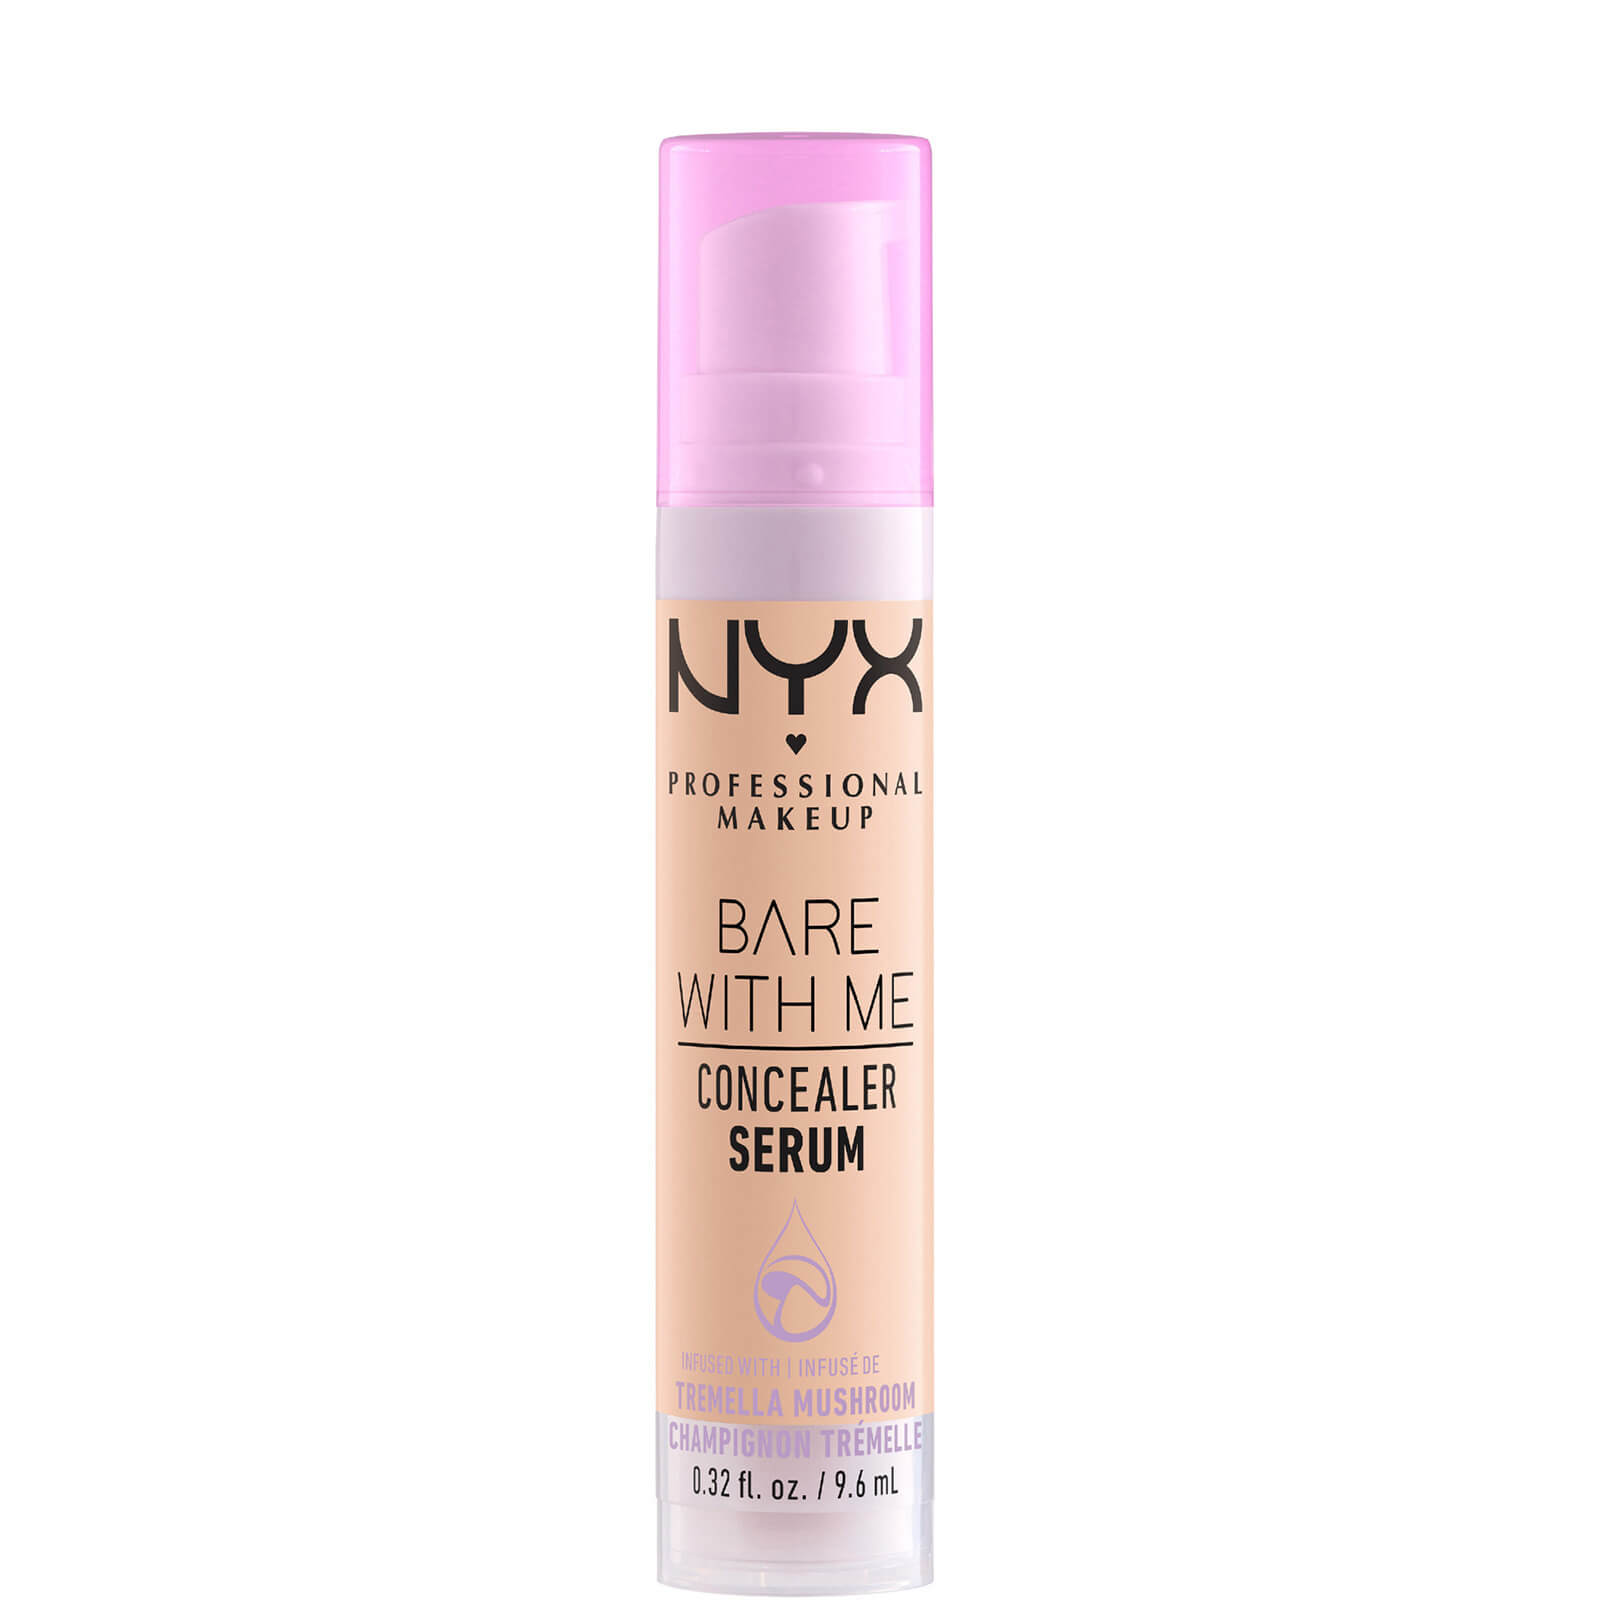 Image of NYX Professional Makeup Bare With Me Concealer Serum 9.6ml (Various Shades) - Vanilla